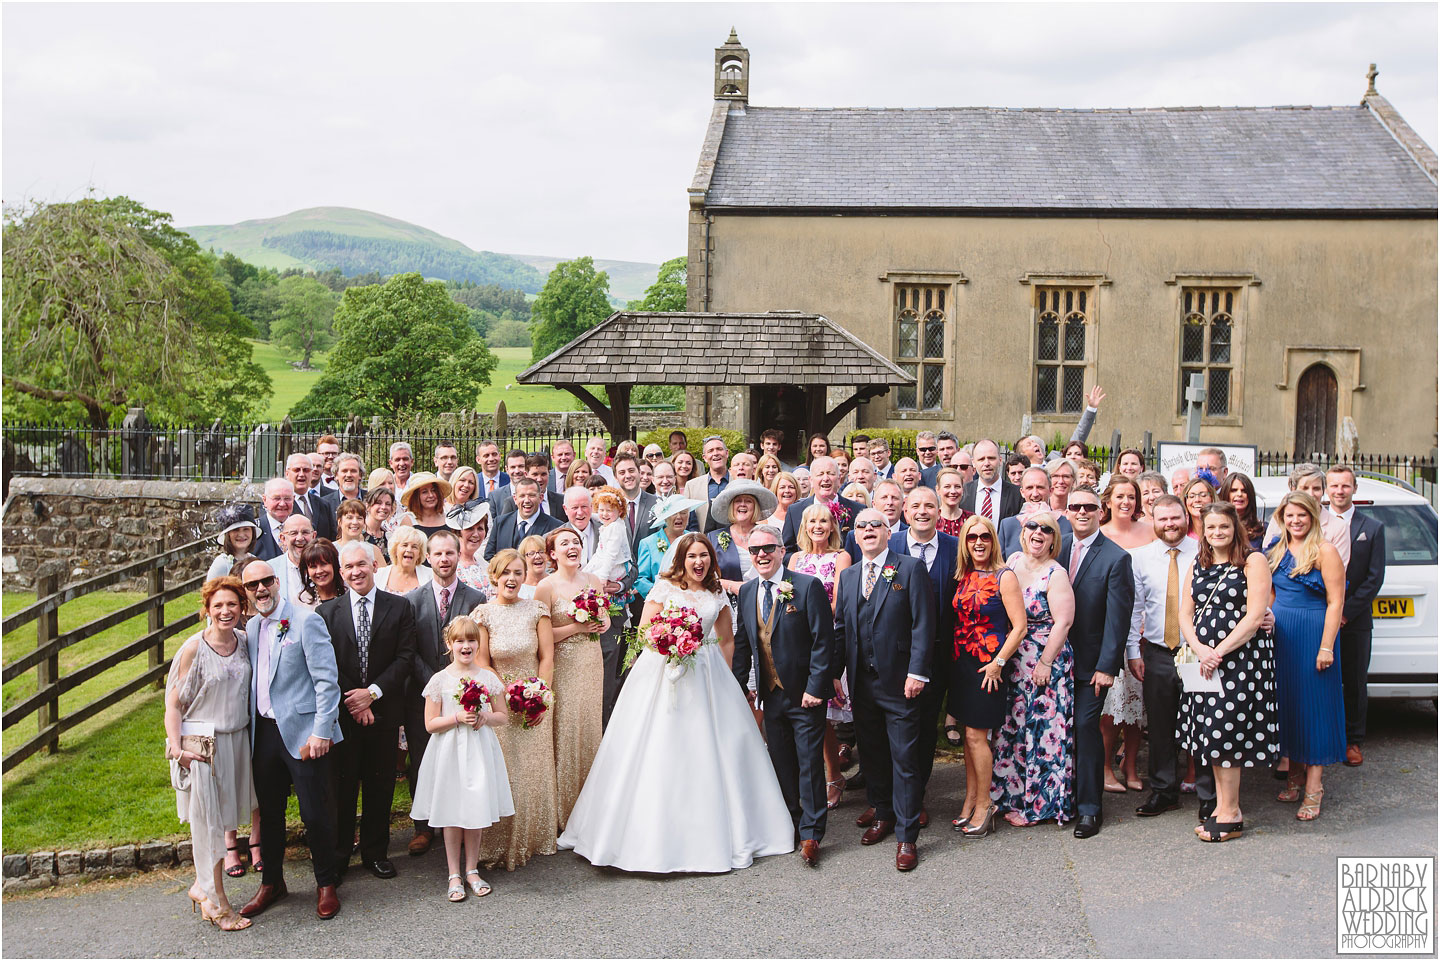 Summer wedding photography at the Inn at Whitewell; Clitheroe Wedding Photographer Lancashire; Lancashire Wedding photography; Barnaby Aldrick Wedding Photography